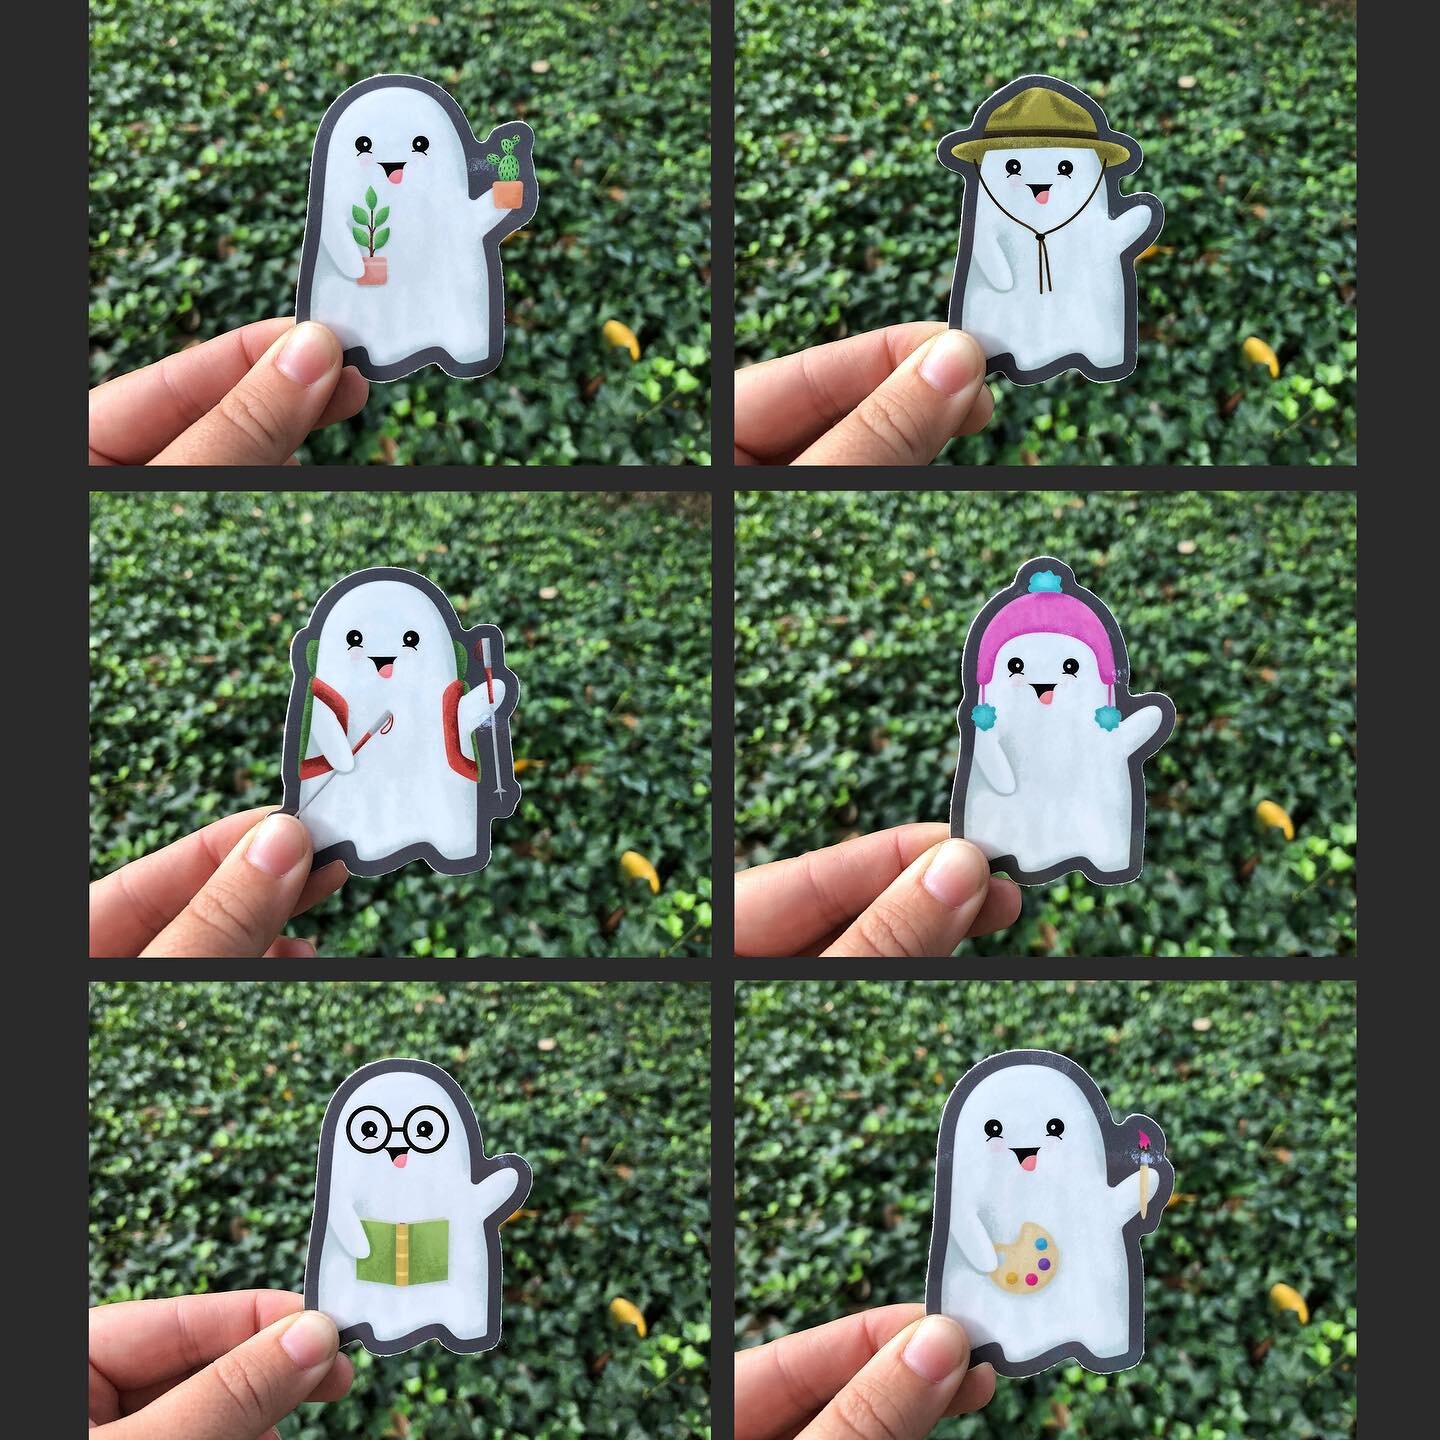 It&rsquo;s spooky season! Which means time for some Halloween themed #etsy merch. These cute lil ghostie stickers are available in my shop, along with some fun pop culture inspired seasonal prints. Link in bio, or search TheFictionPhantom on Etsy!

#